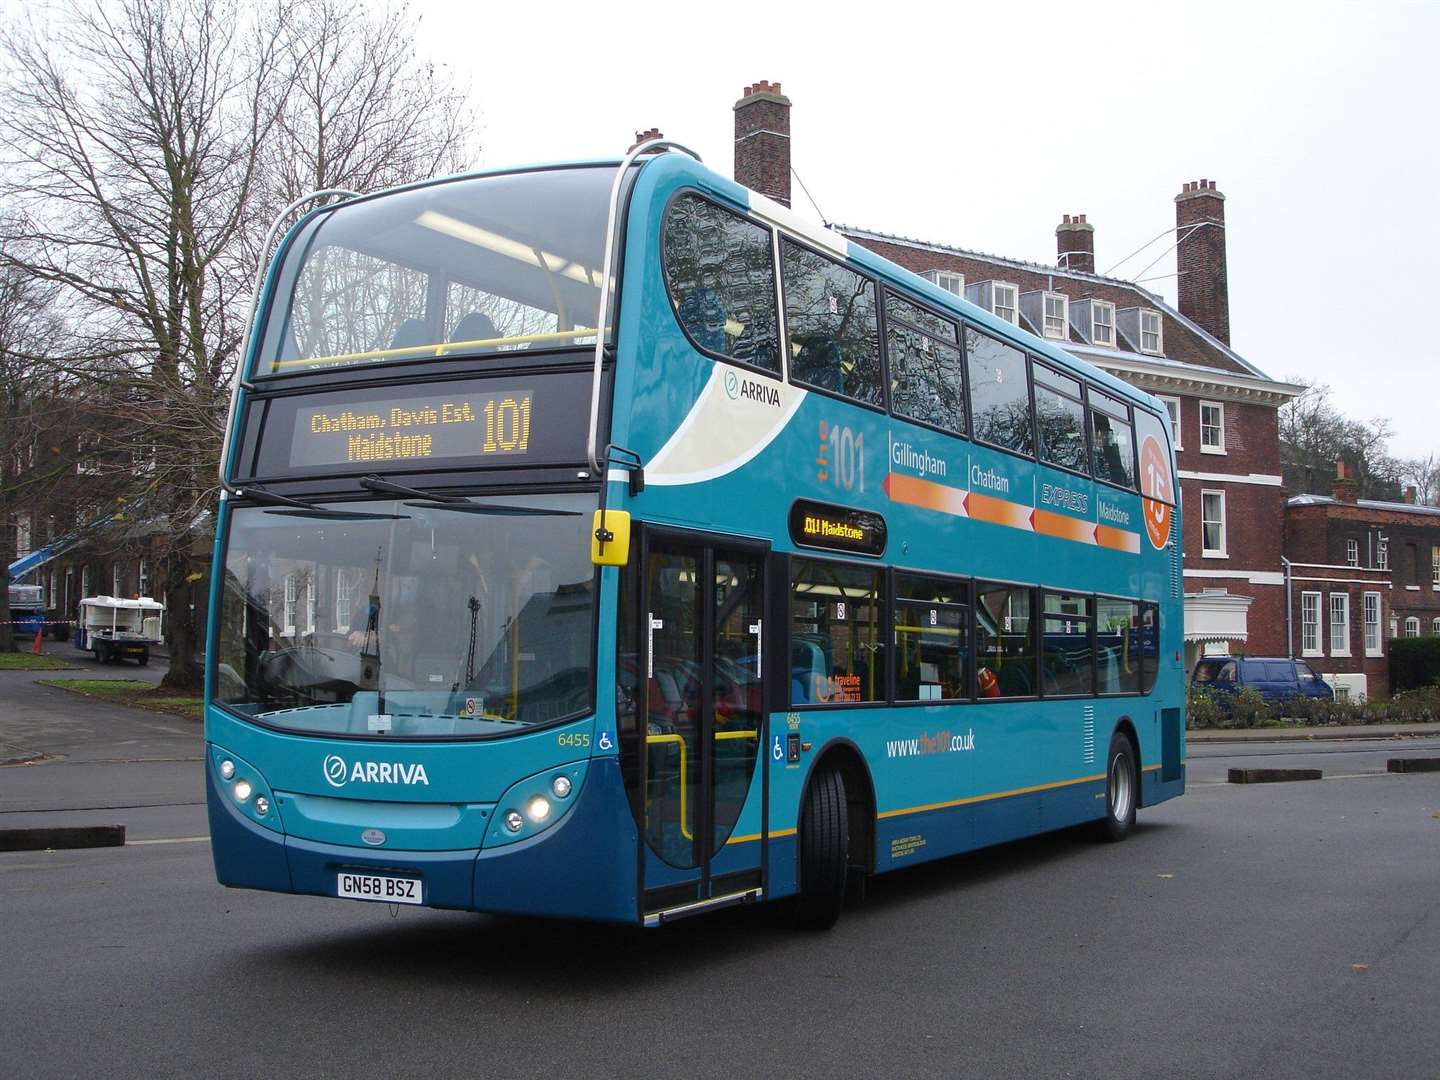 The 101 service which serves Maidstone and Gillingham is set for a diversion during roadworks